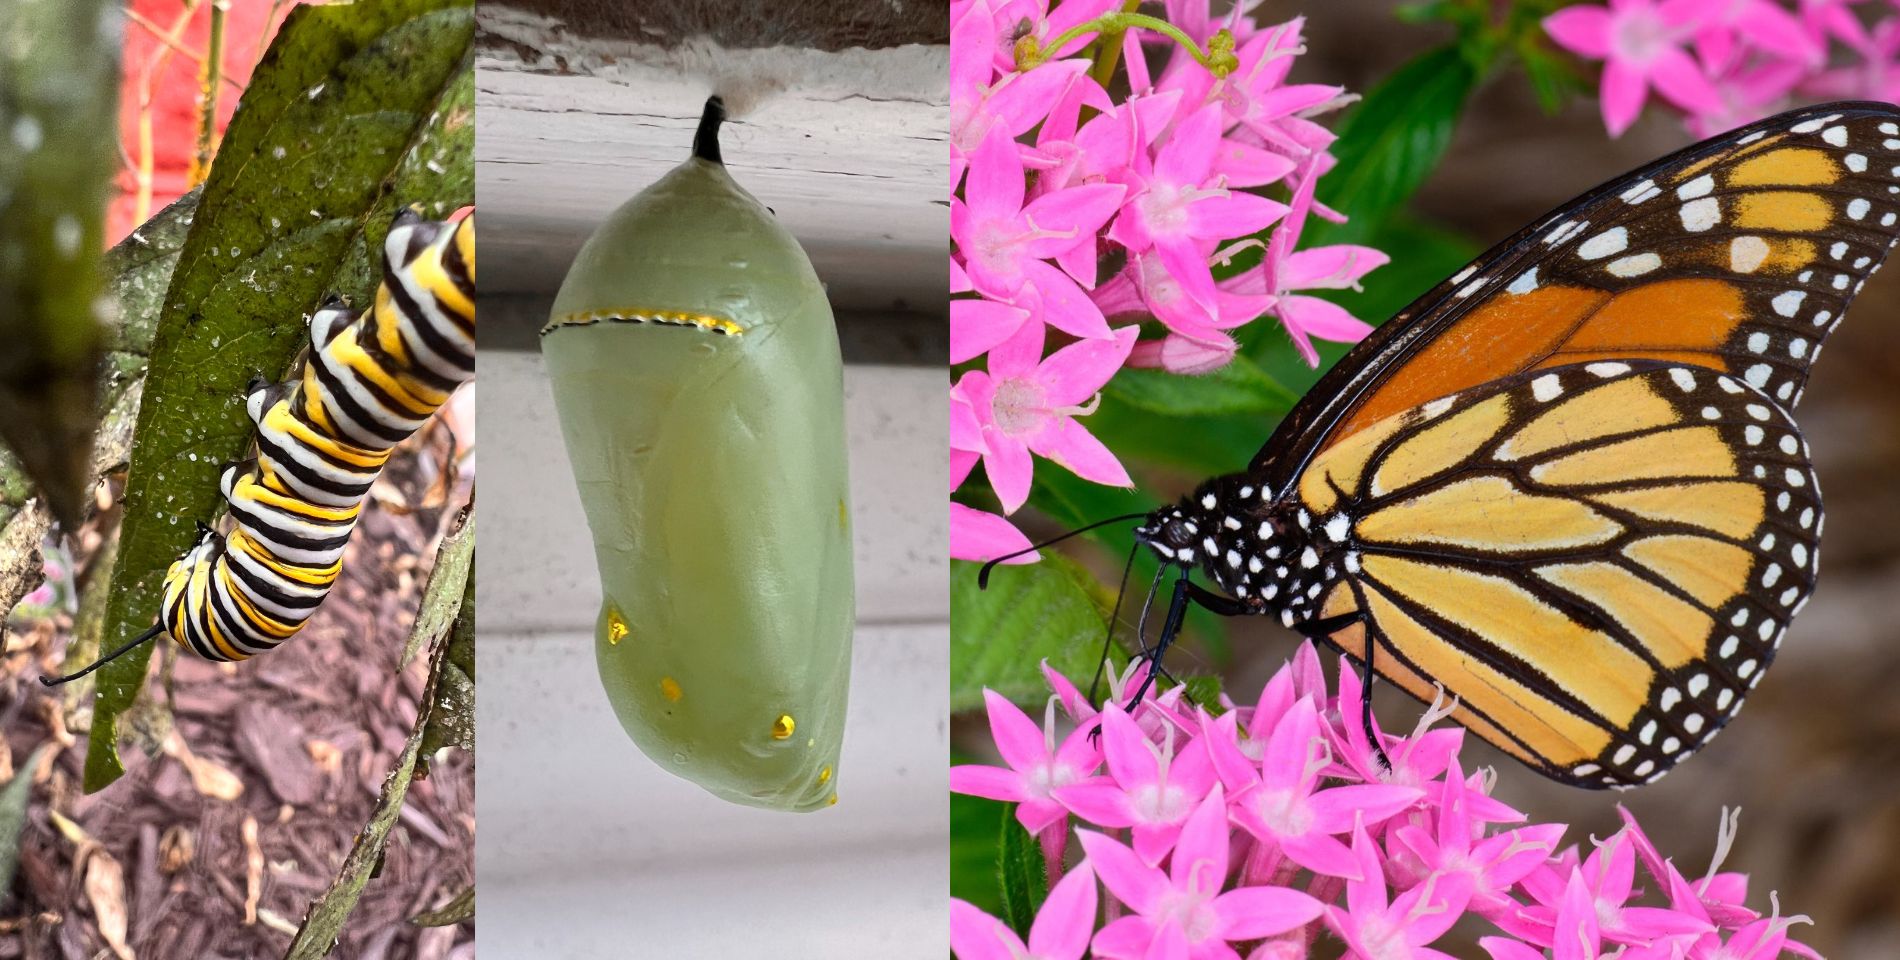 A monarch caterpillar, chrysalis, and butterfly from the garden of Bay Haven Inn of Cape Charles